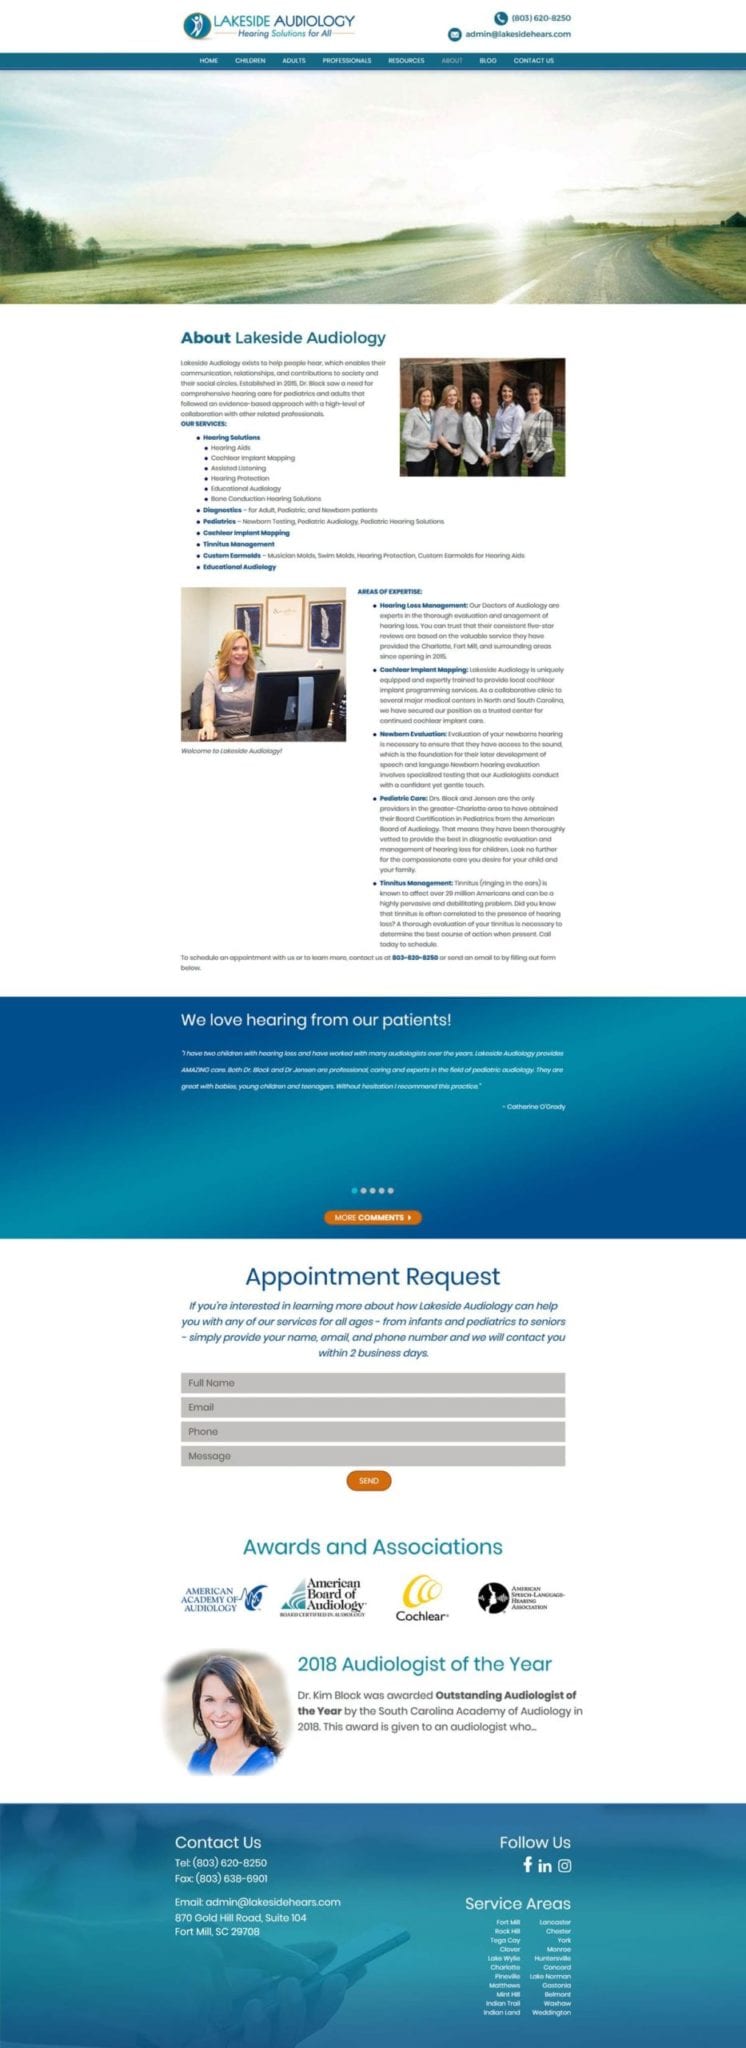 Lakeside Audiology website about page screenshot